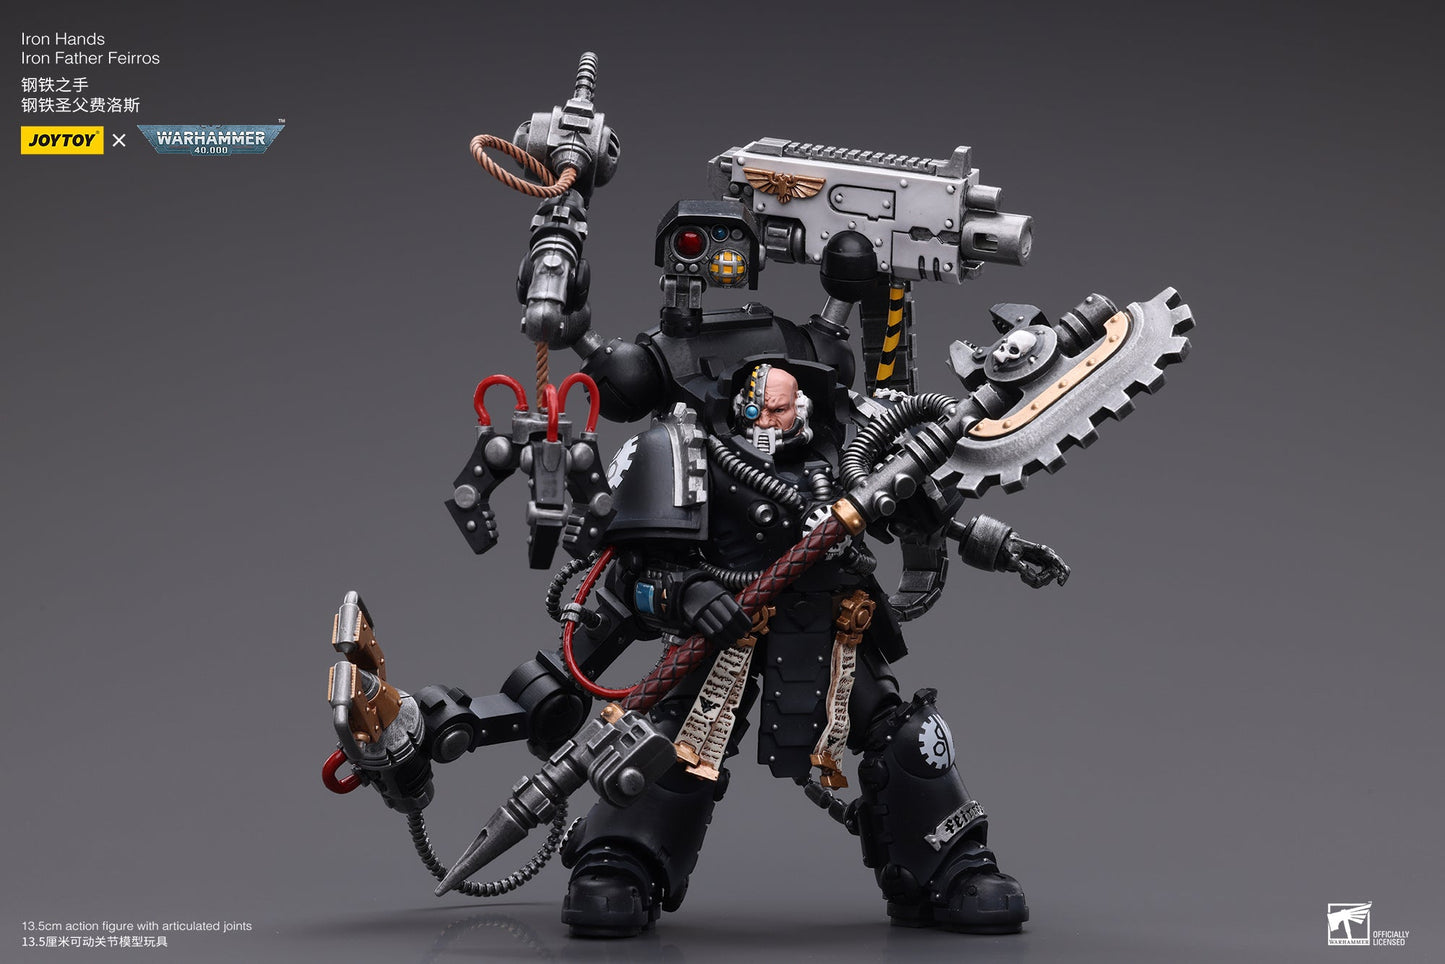 Warhammer 40K Iron Hands lron Father Feirros (In Stock)